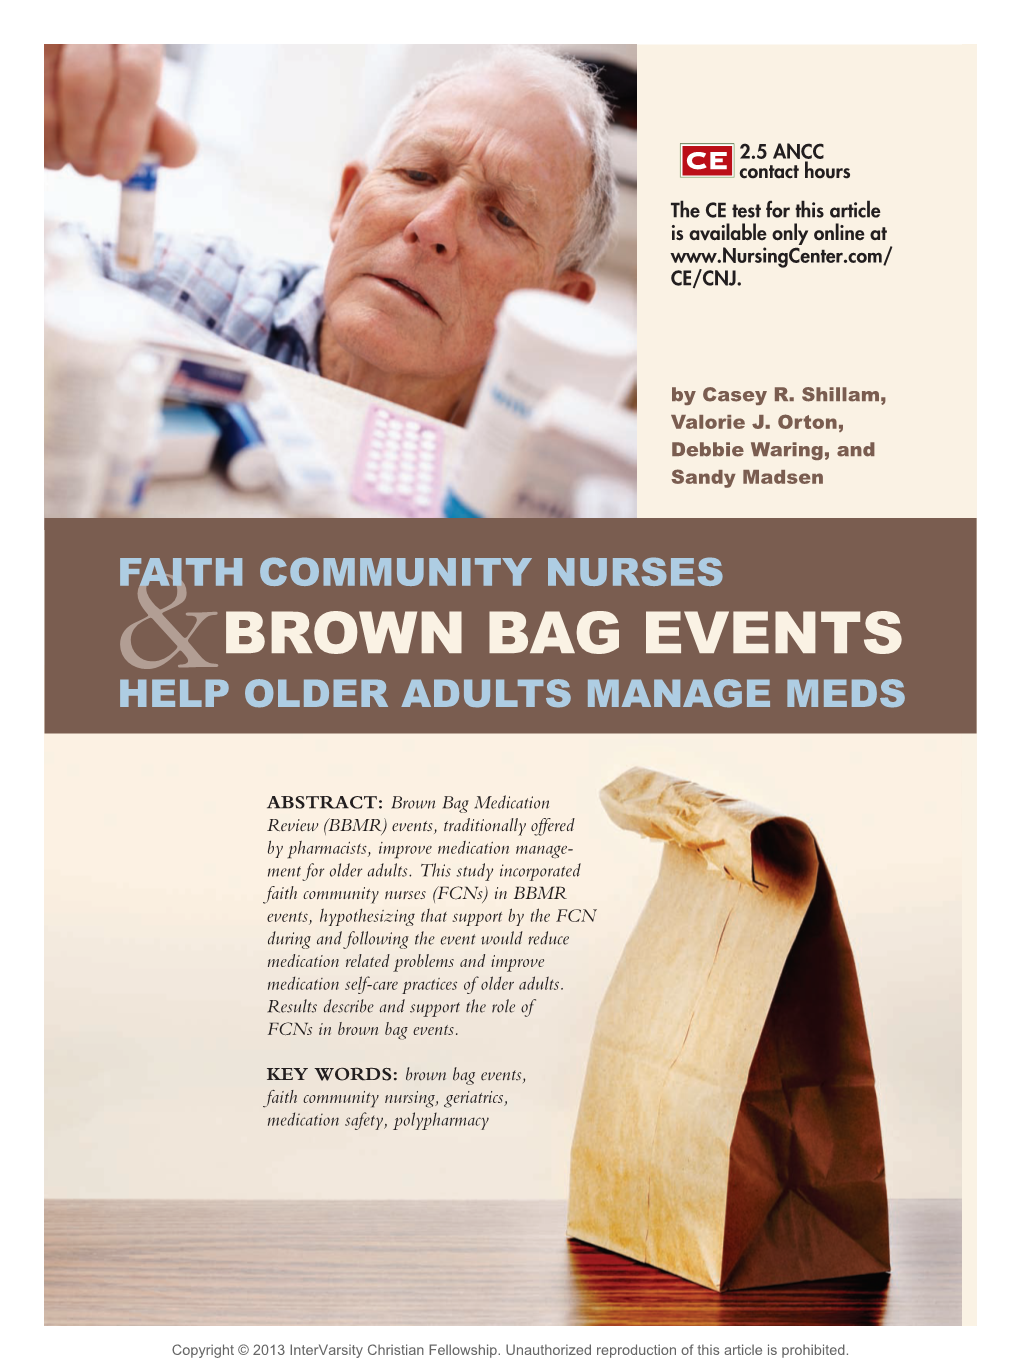 &Brown Bag Events